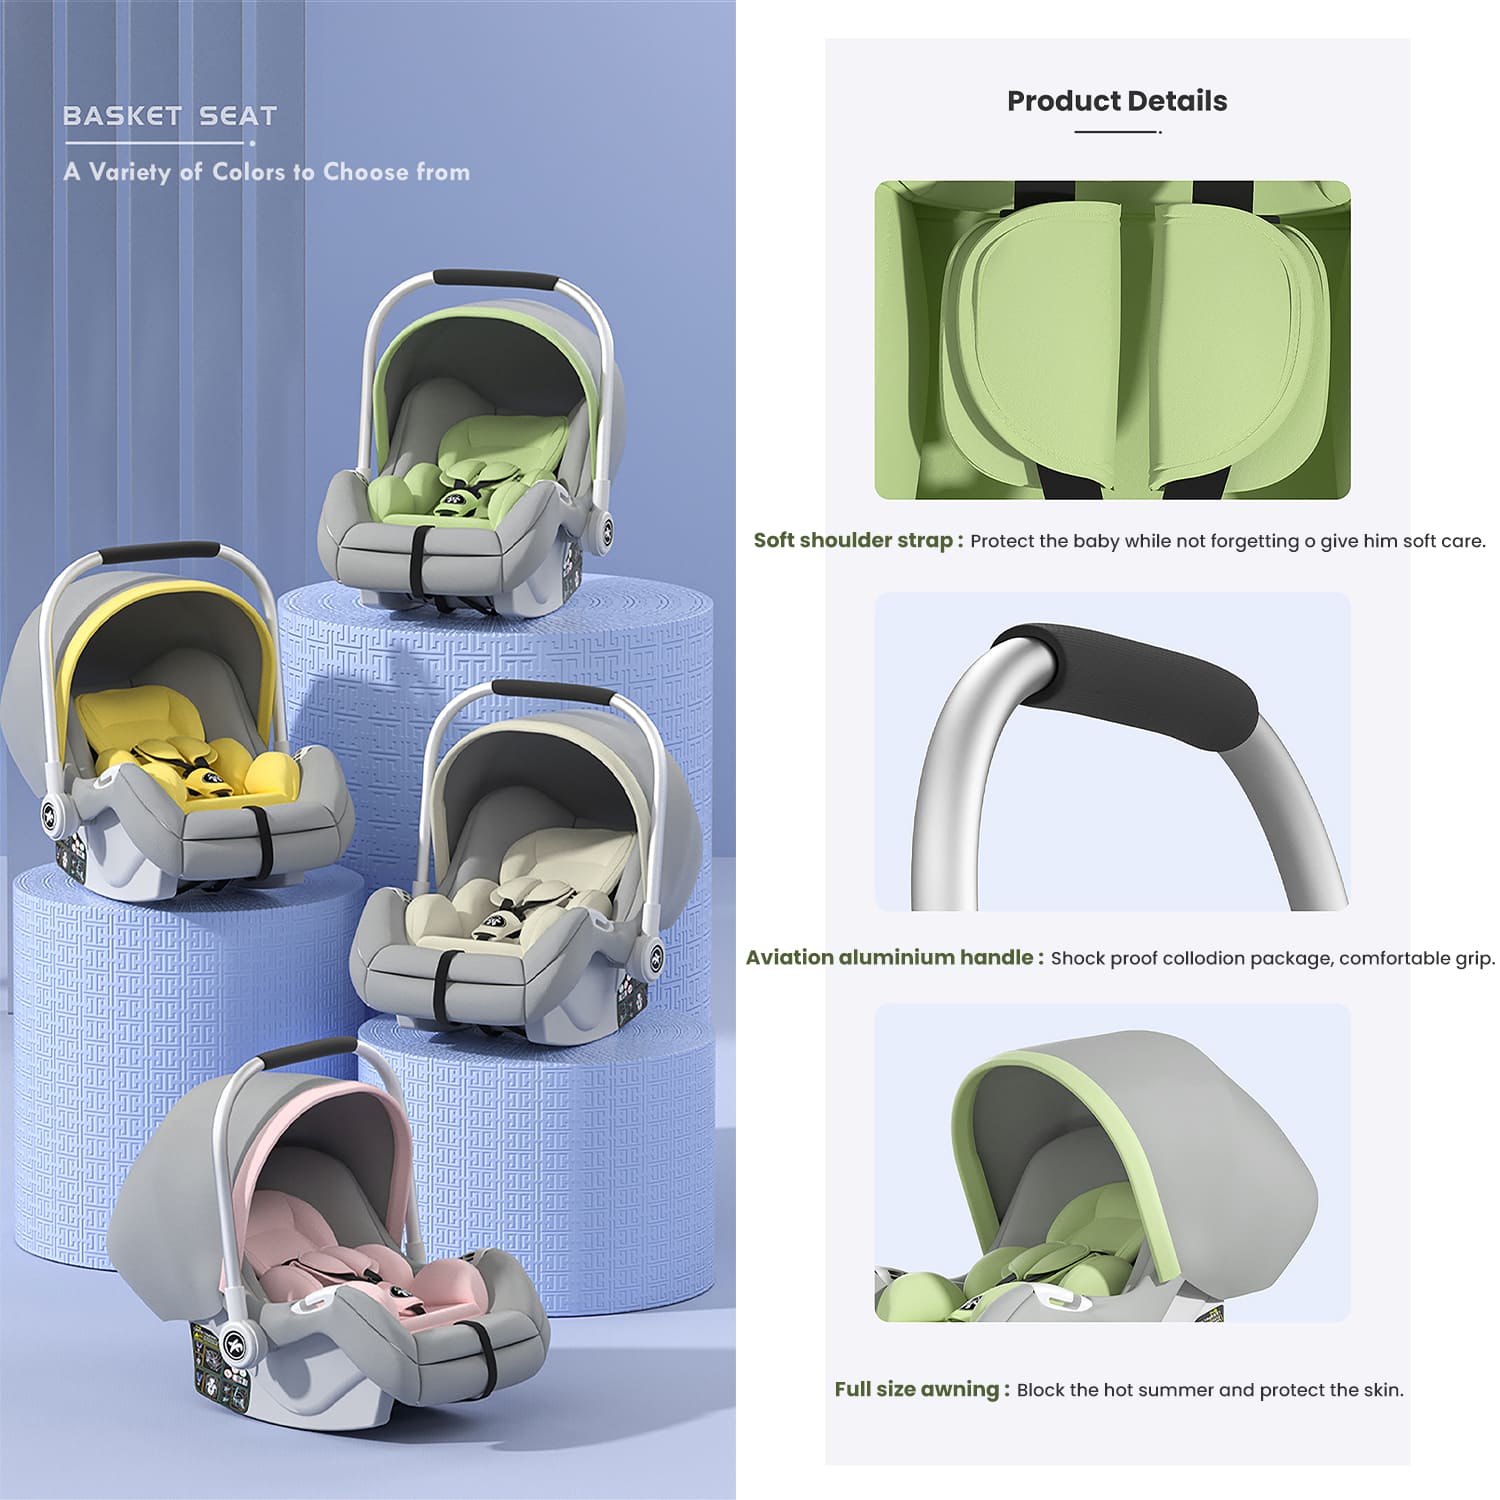 Baby Carry Cot - Convenient and Comfortable Transportation for Your Little One